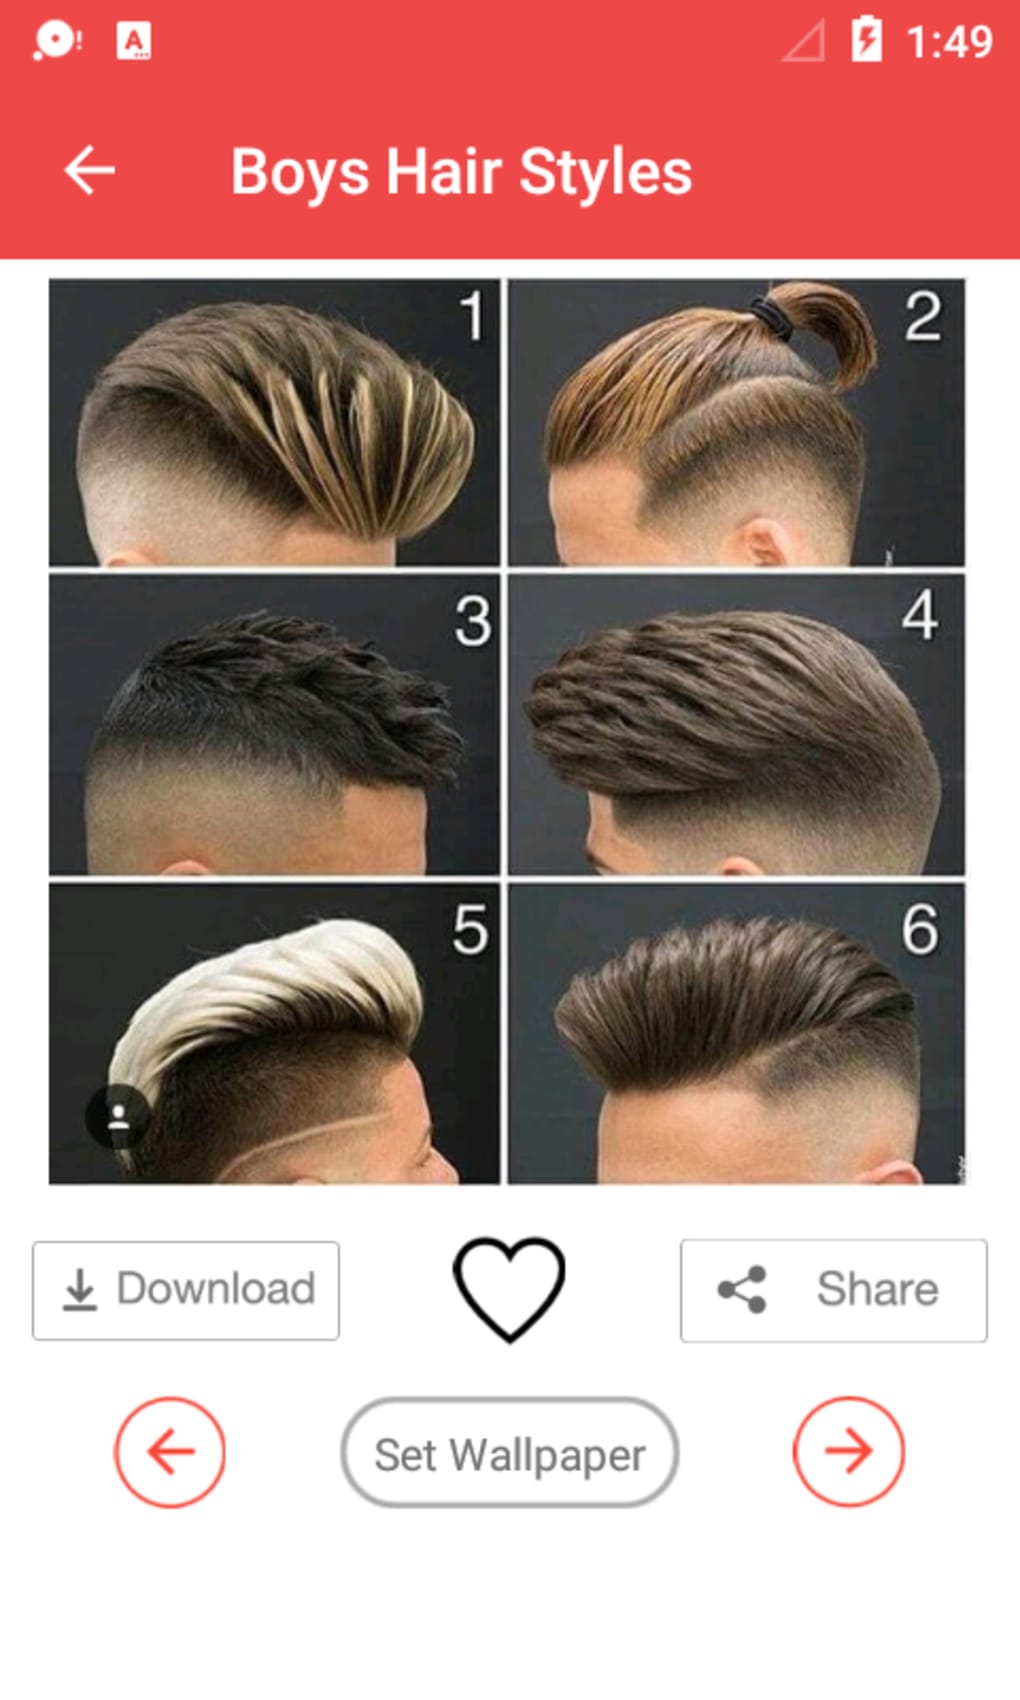 Boy Hair Style Images || Boy Hair Style Images Download || Hairstyles Boys  Wallpapers || New Hairstyle Boy Photo Download || Boy Hair Style Tips :  u/imagesking